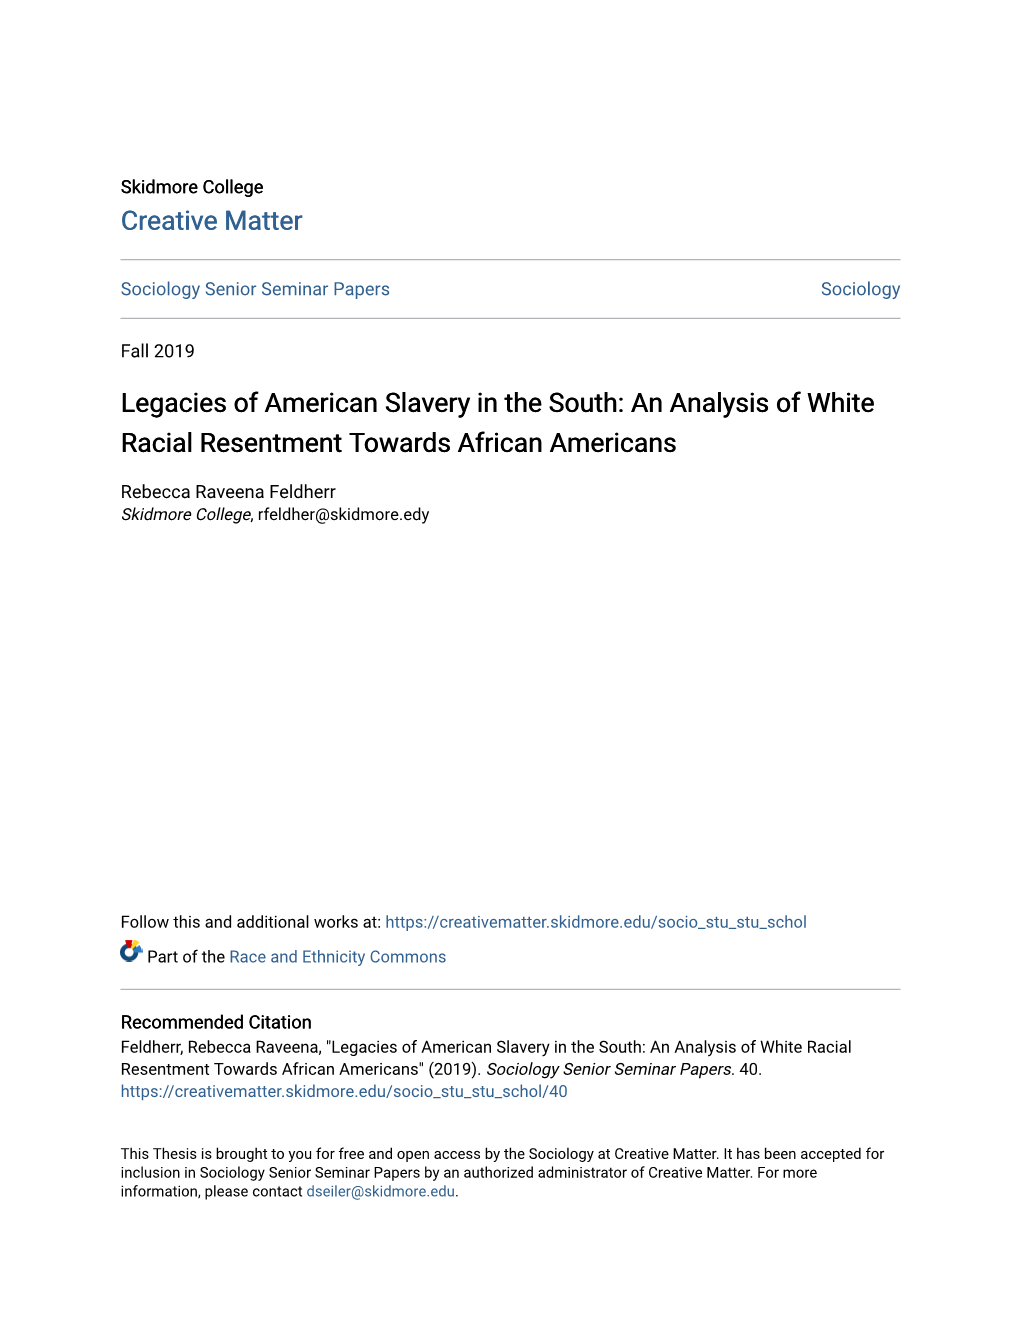 Legacies of American Slavery in the South: an Analysis of White Racial Resentment Towards African Americans